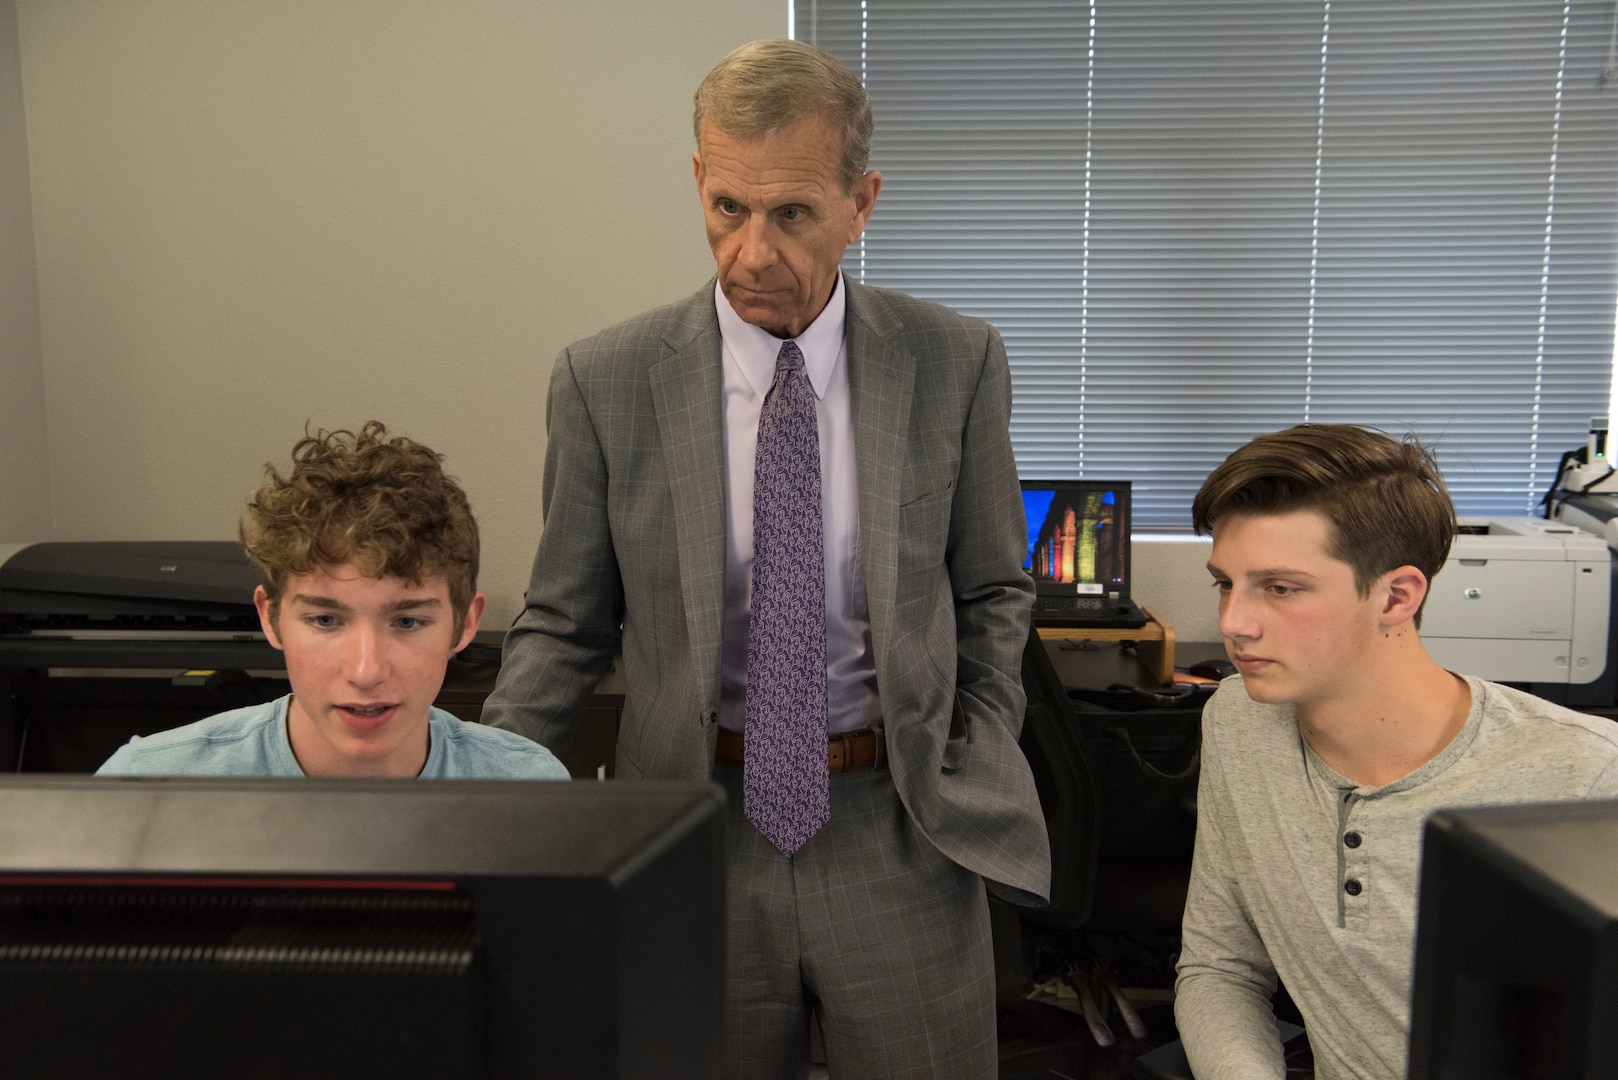 Frank Brogan, Department of Education assistant secretary for elementary and secondary education, speaks with members of Lackland Independent School District’s CyberPatriot team April 12, 2019, at Joint Base San Antonio-Lackland, Texas.